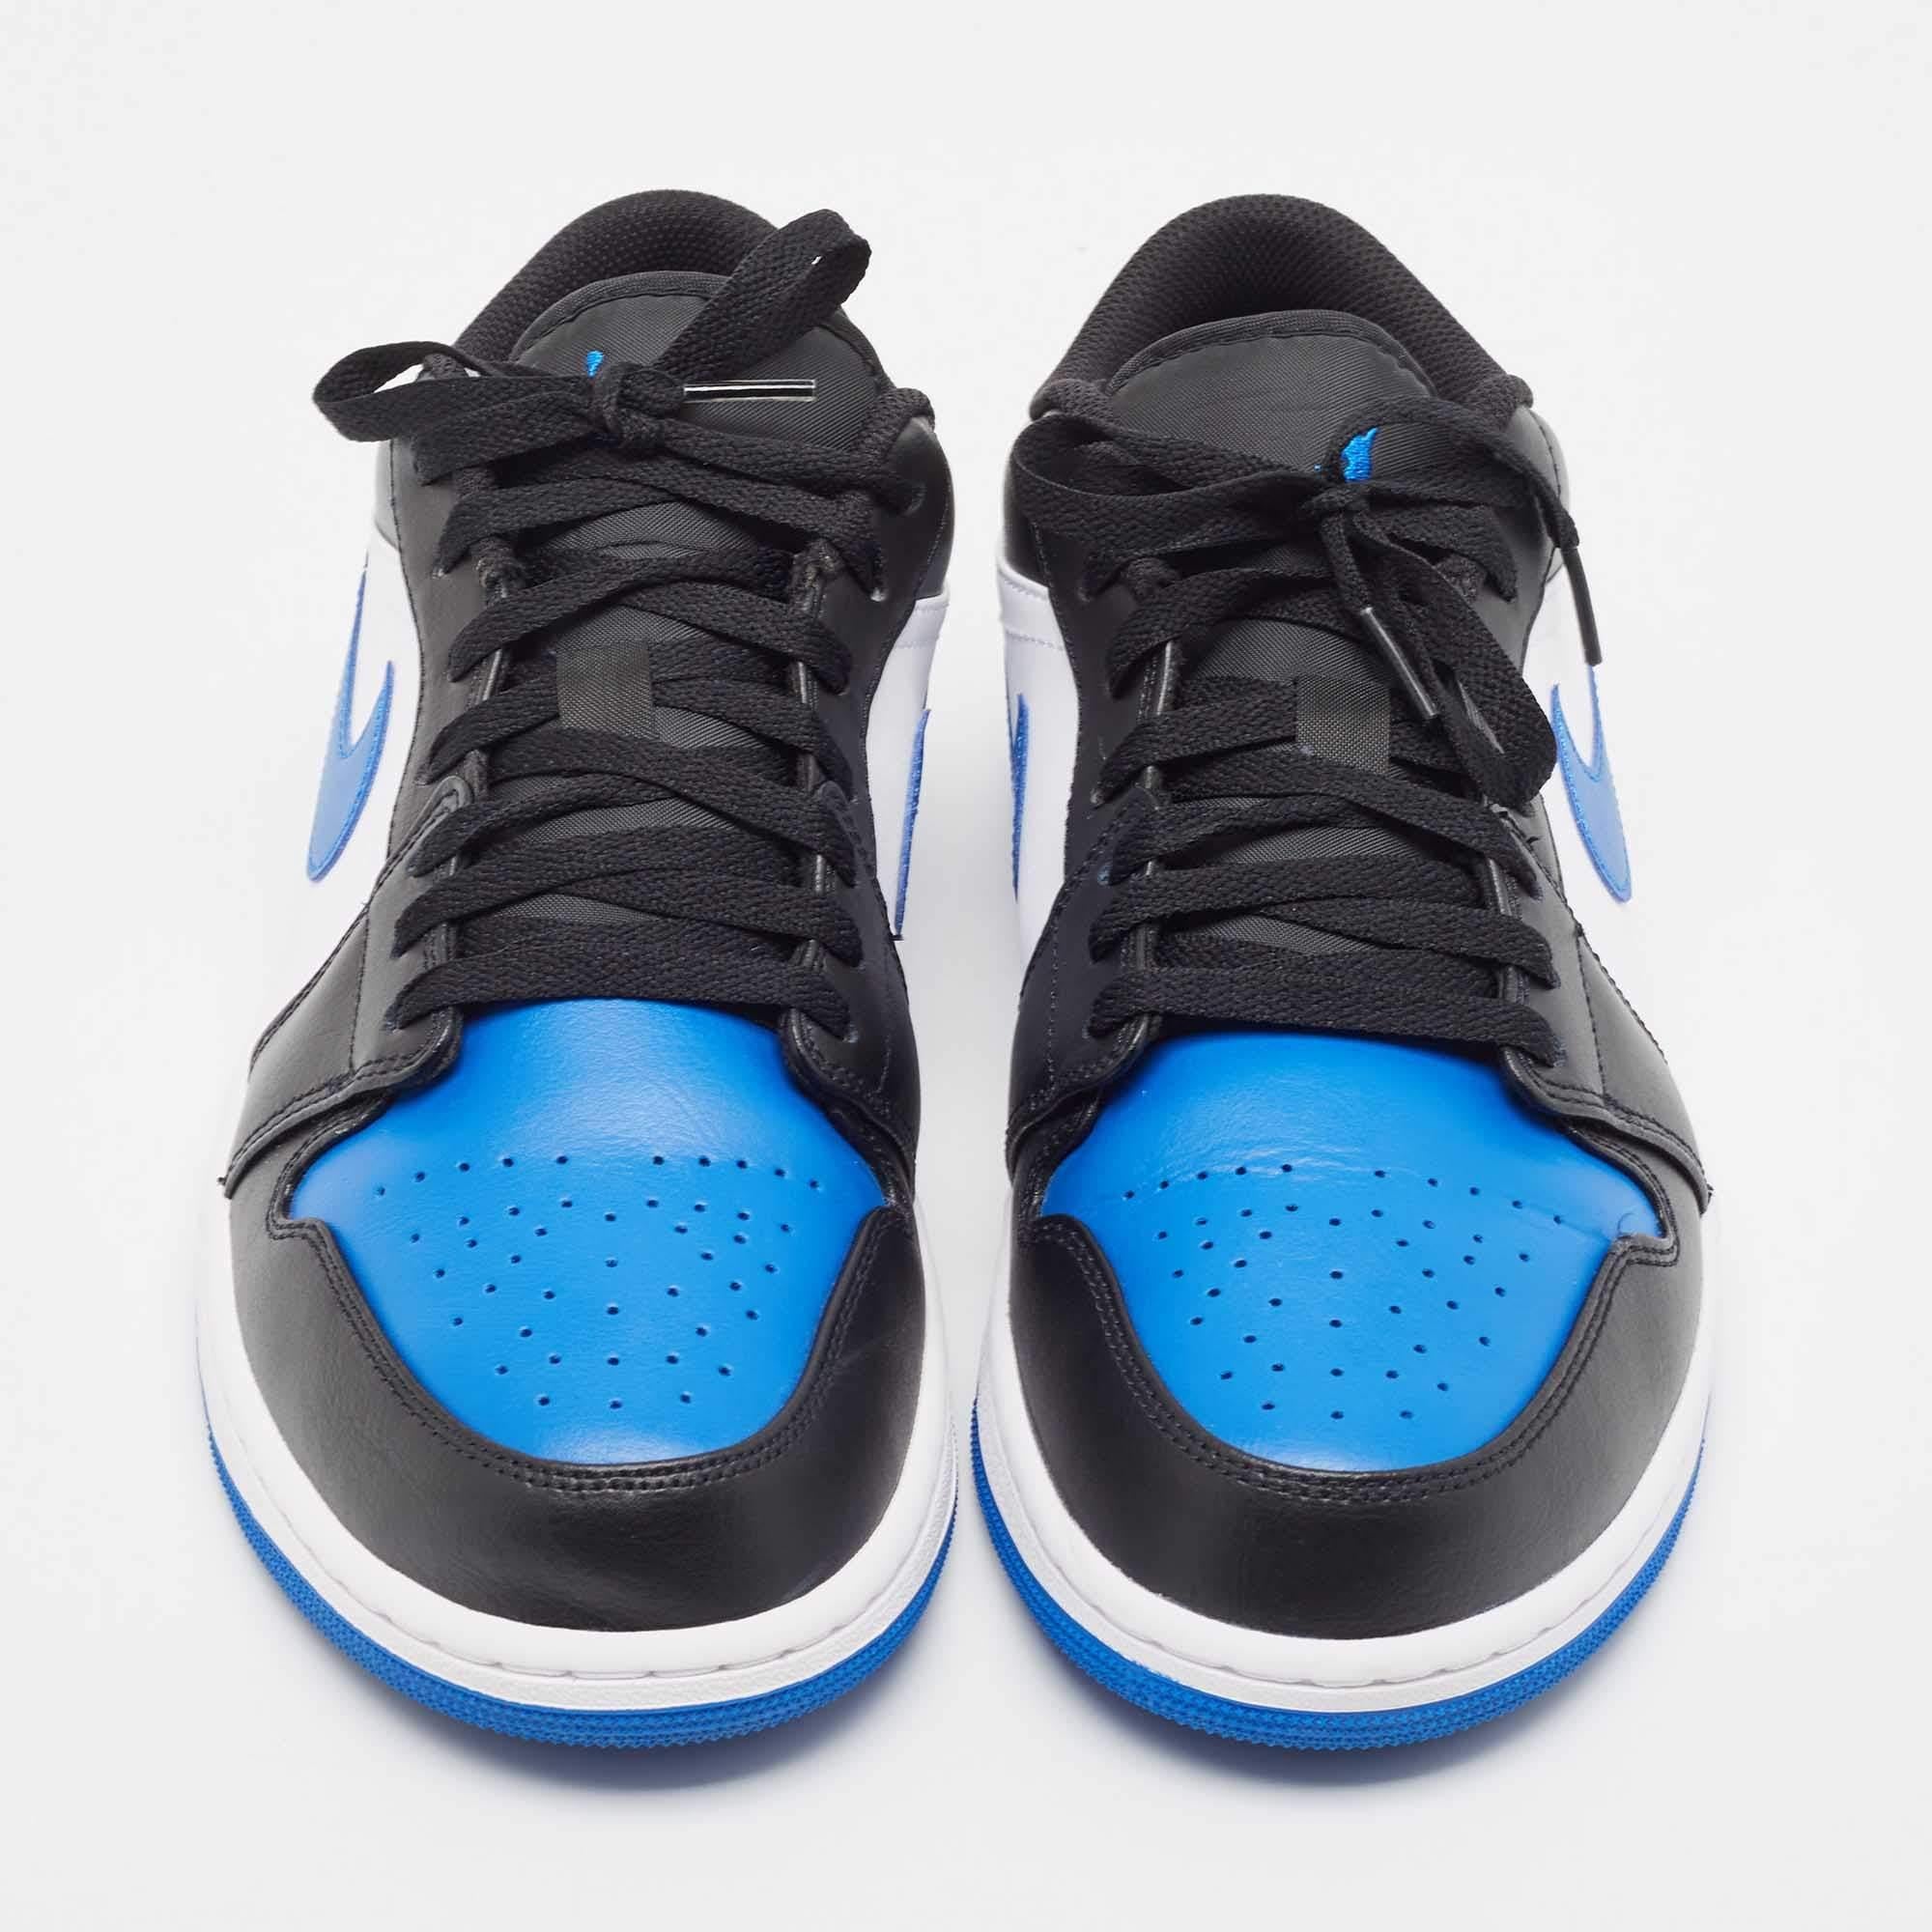 Elevate your footwear game with these Air Jordan sneakers. Combining well-loved elements and unmatched comfort, these sneakers will look great on your feet.

Includes: Original Box